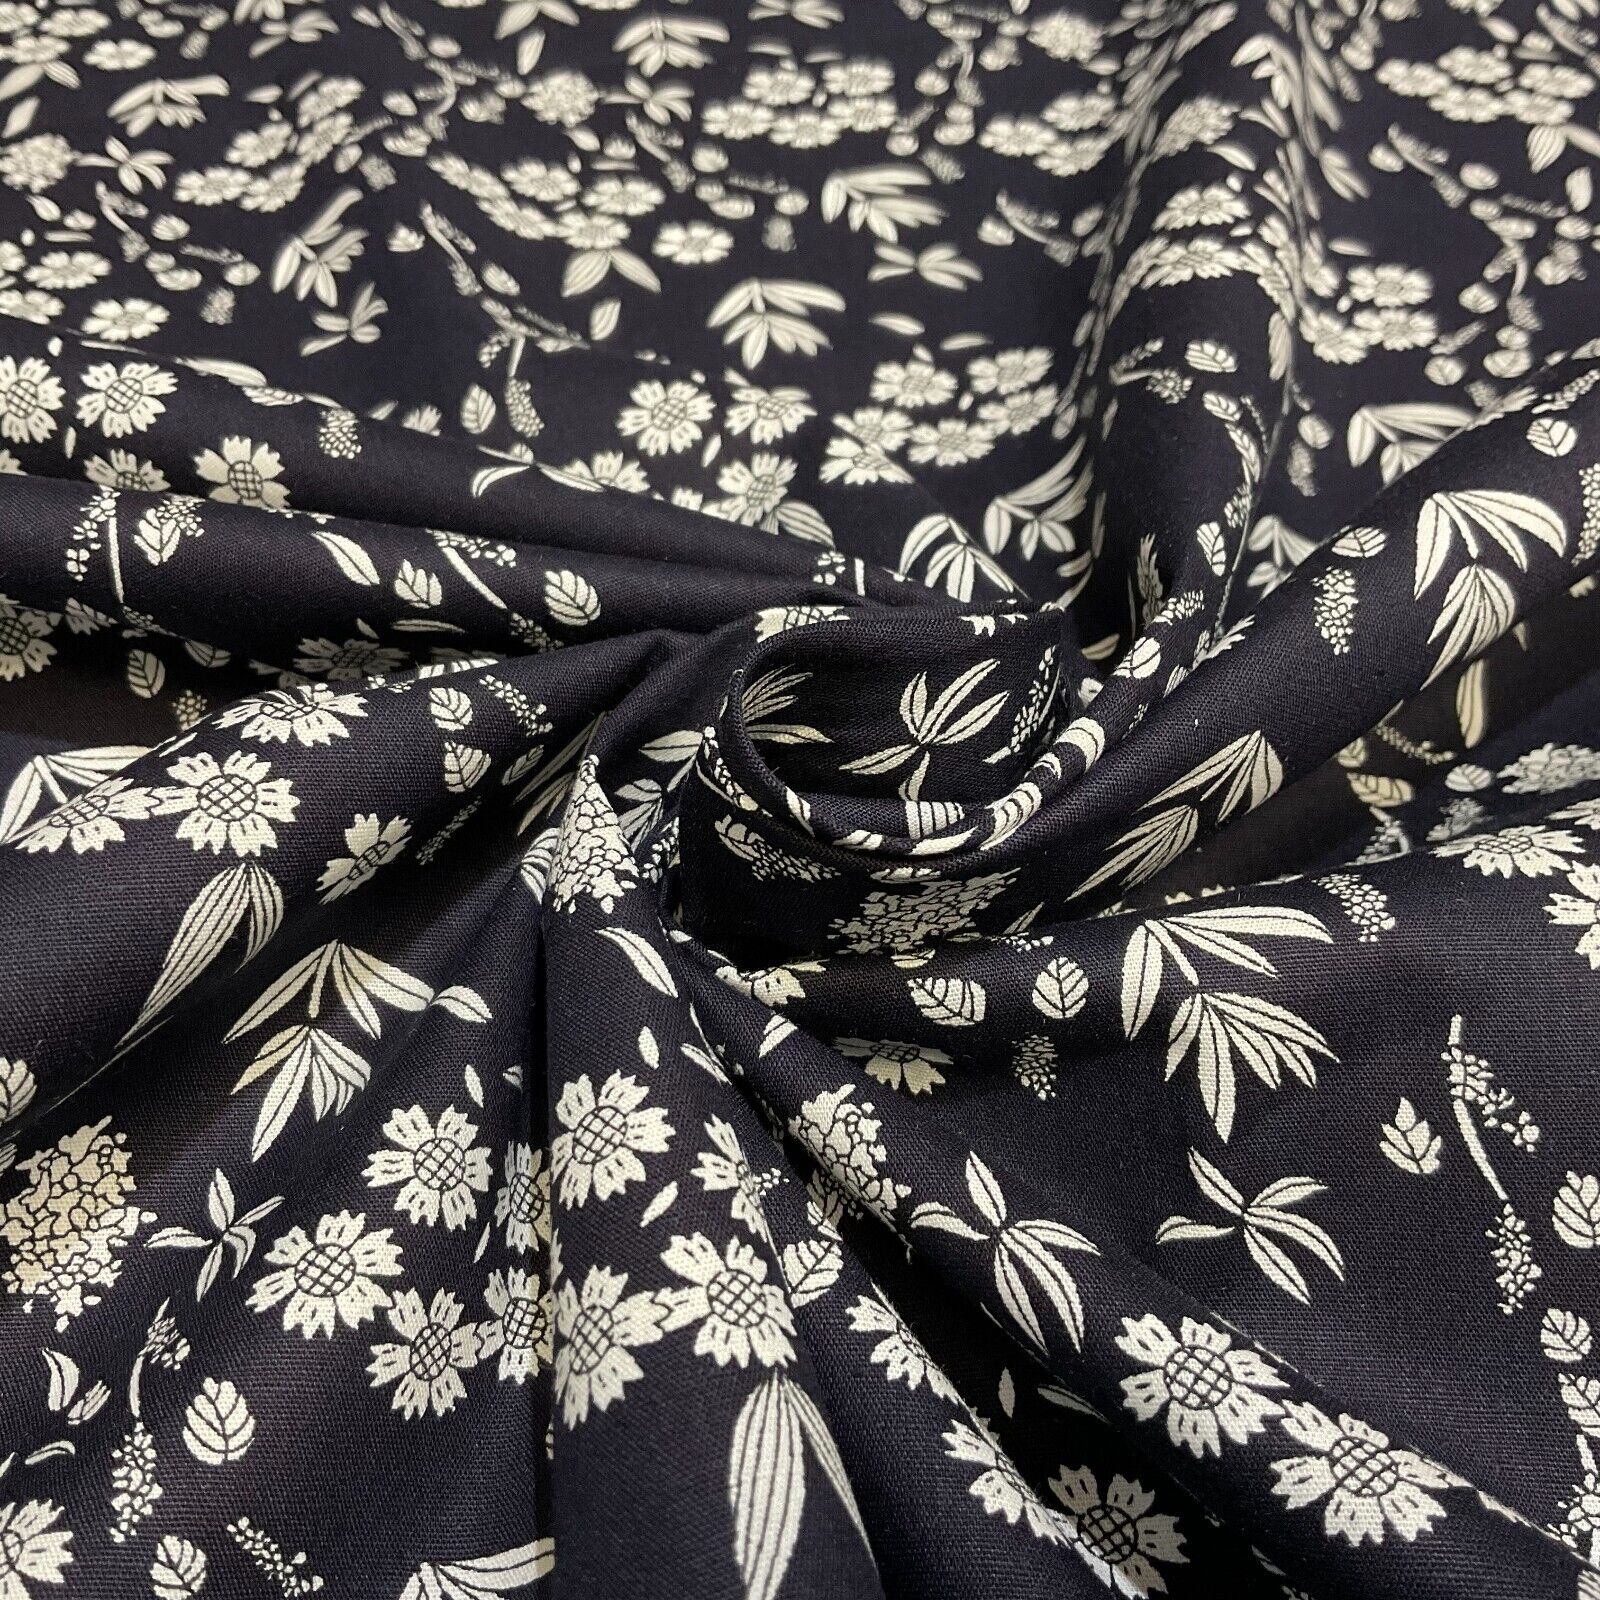 Soft Touch 100% Cotton small Floral printed dress fabric M1649